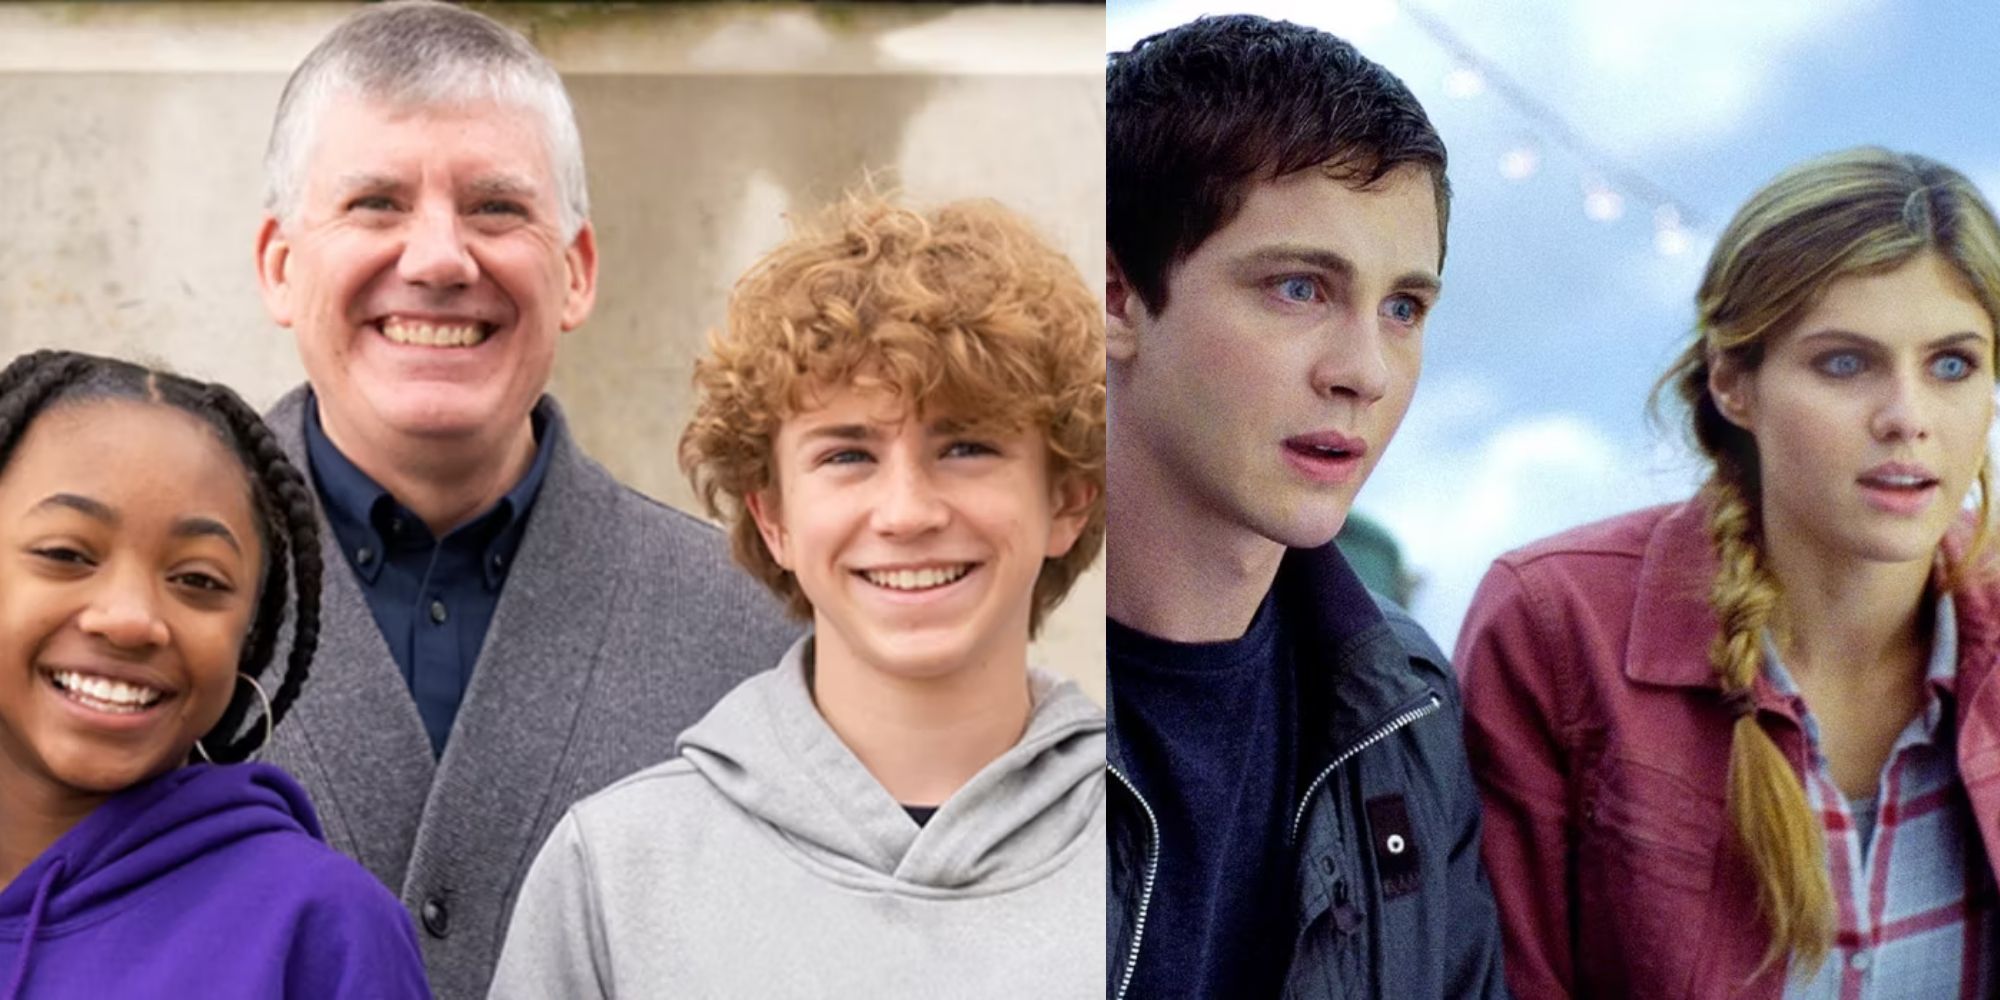 Two split images of the cast of Percy Jackson